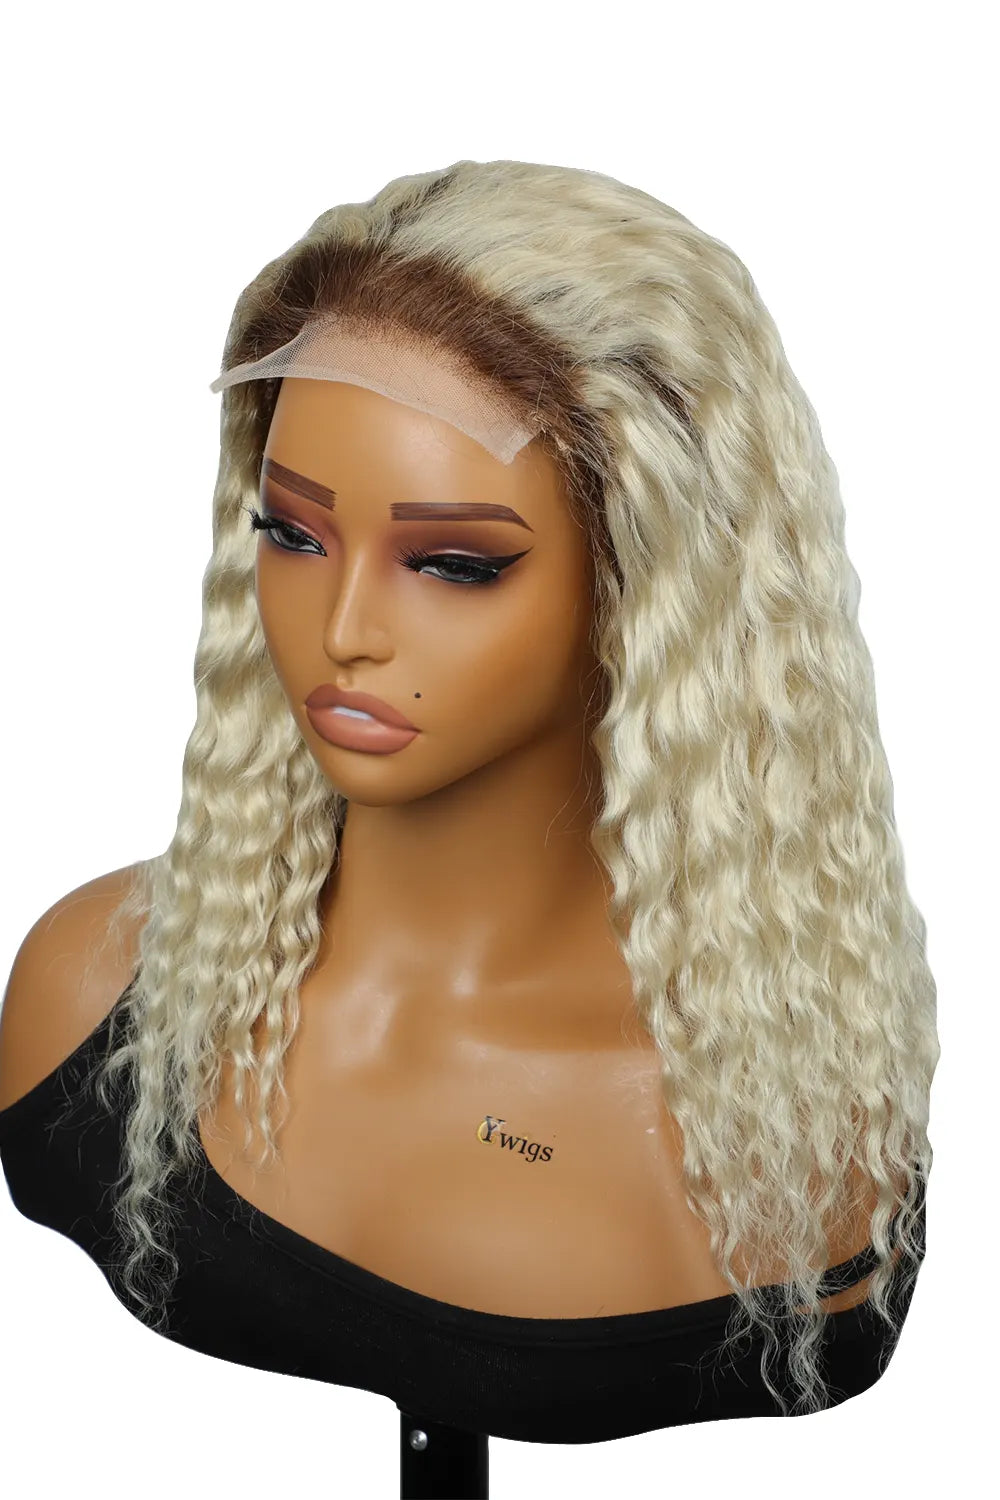 Side view of model with short blonde wavy hair